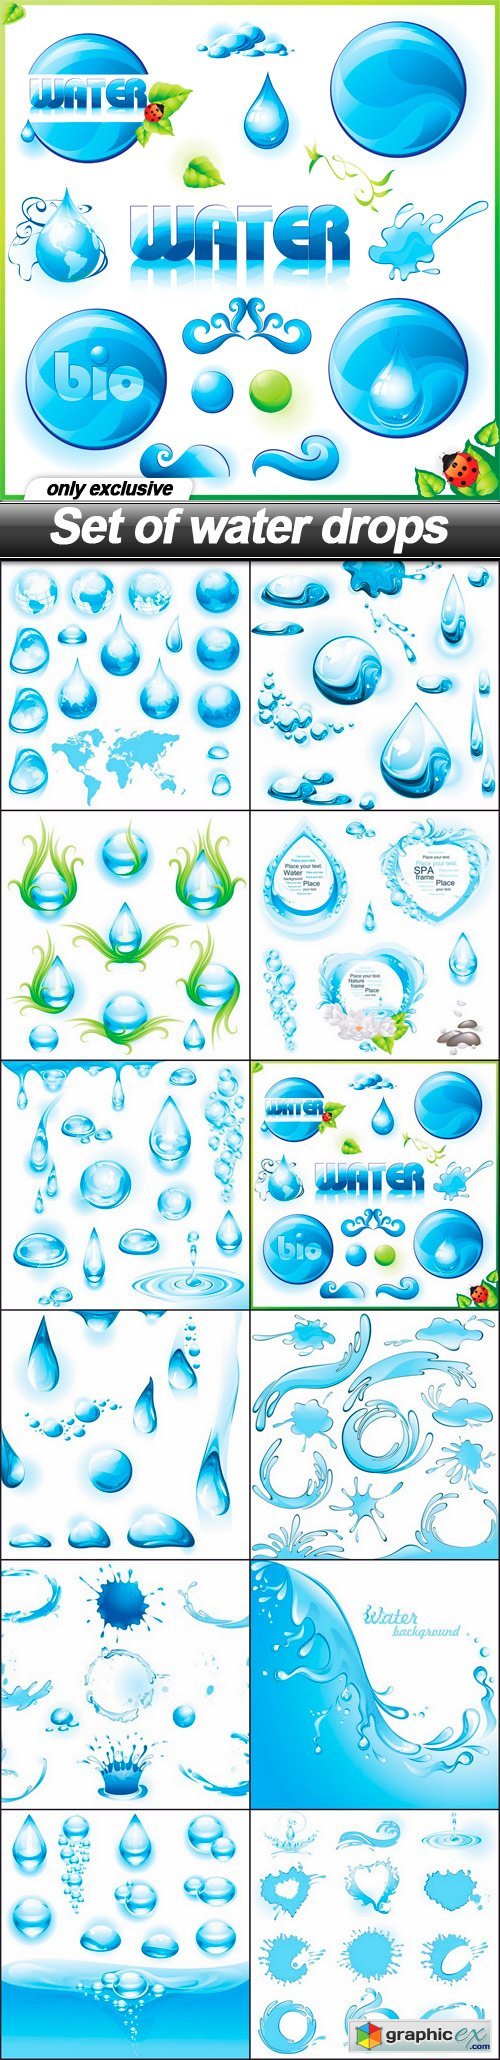 Set of water drops - 12 EPS